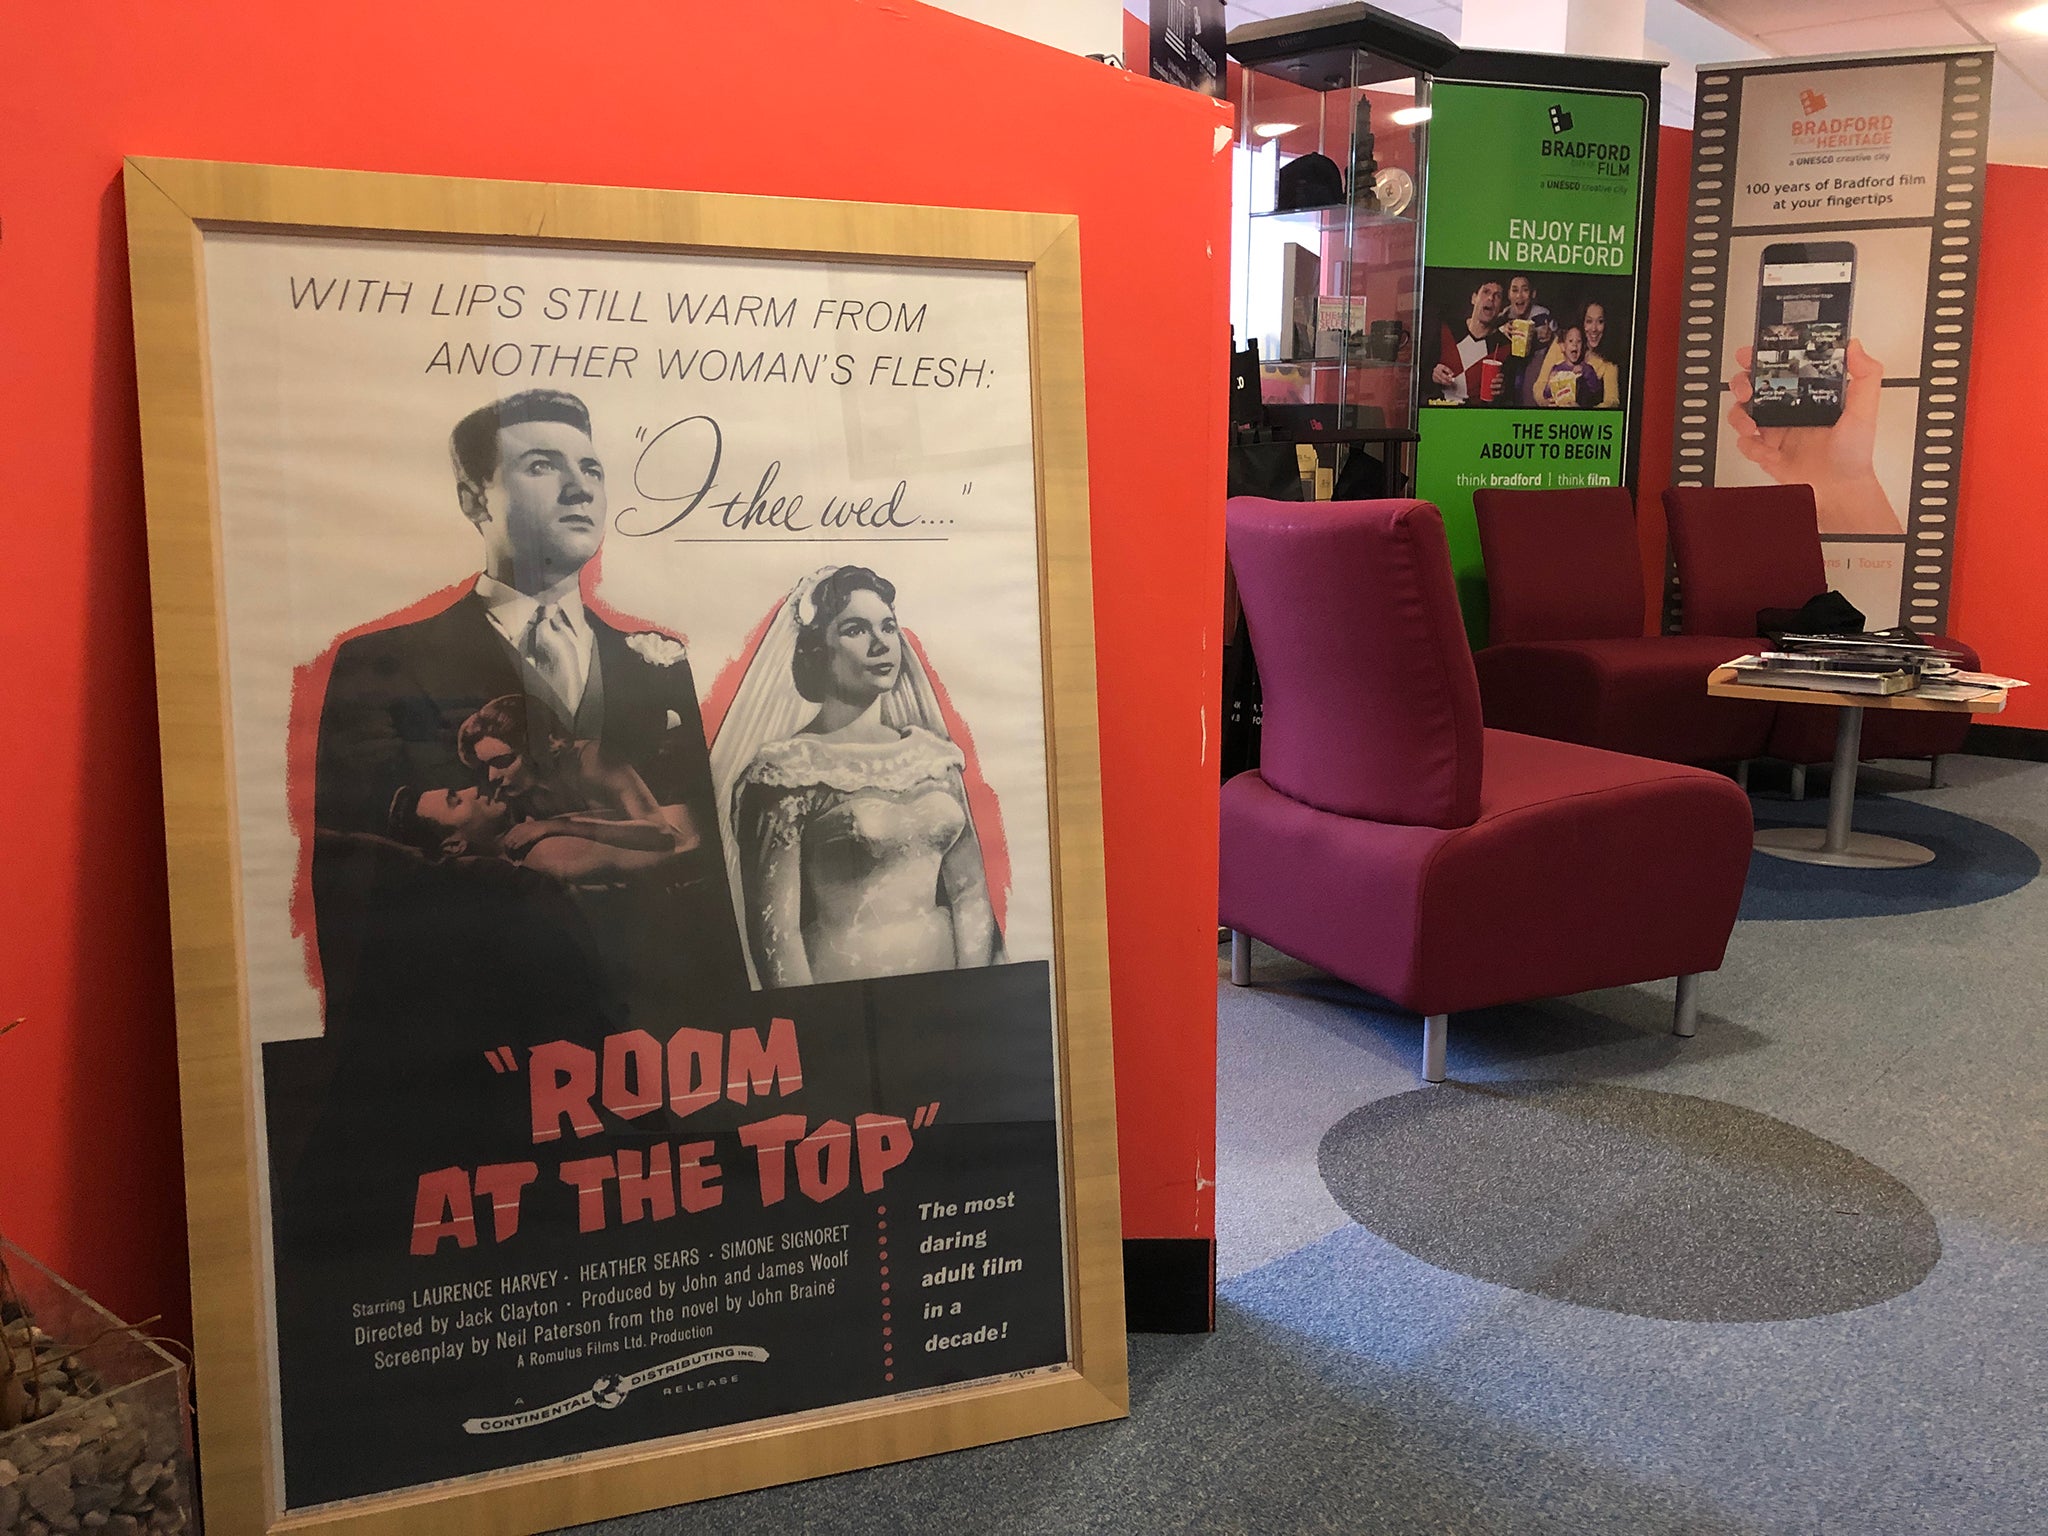 The 1959 classic ‘Room at the Top’ was shot in Bradford